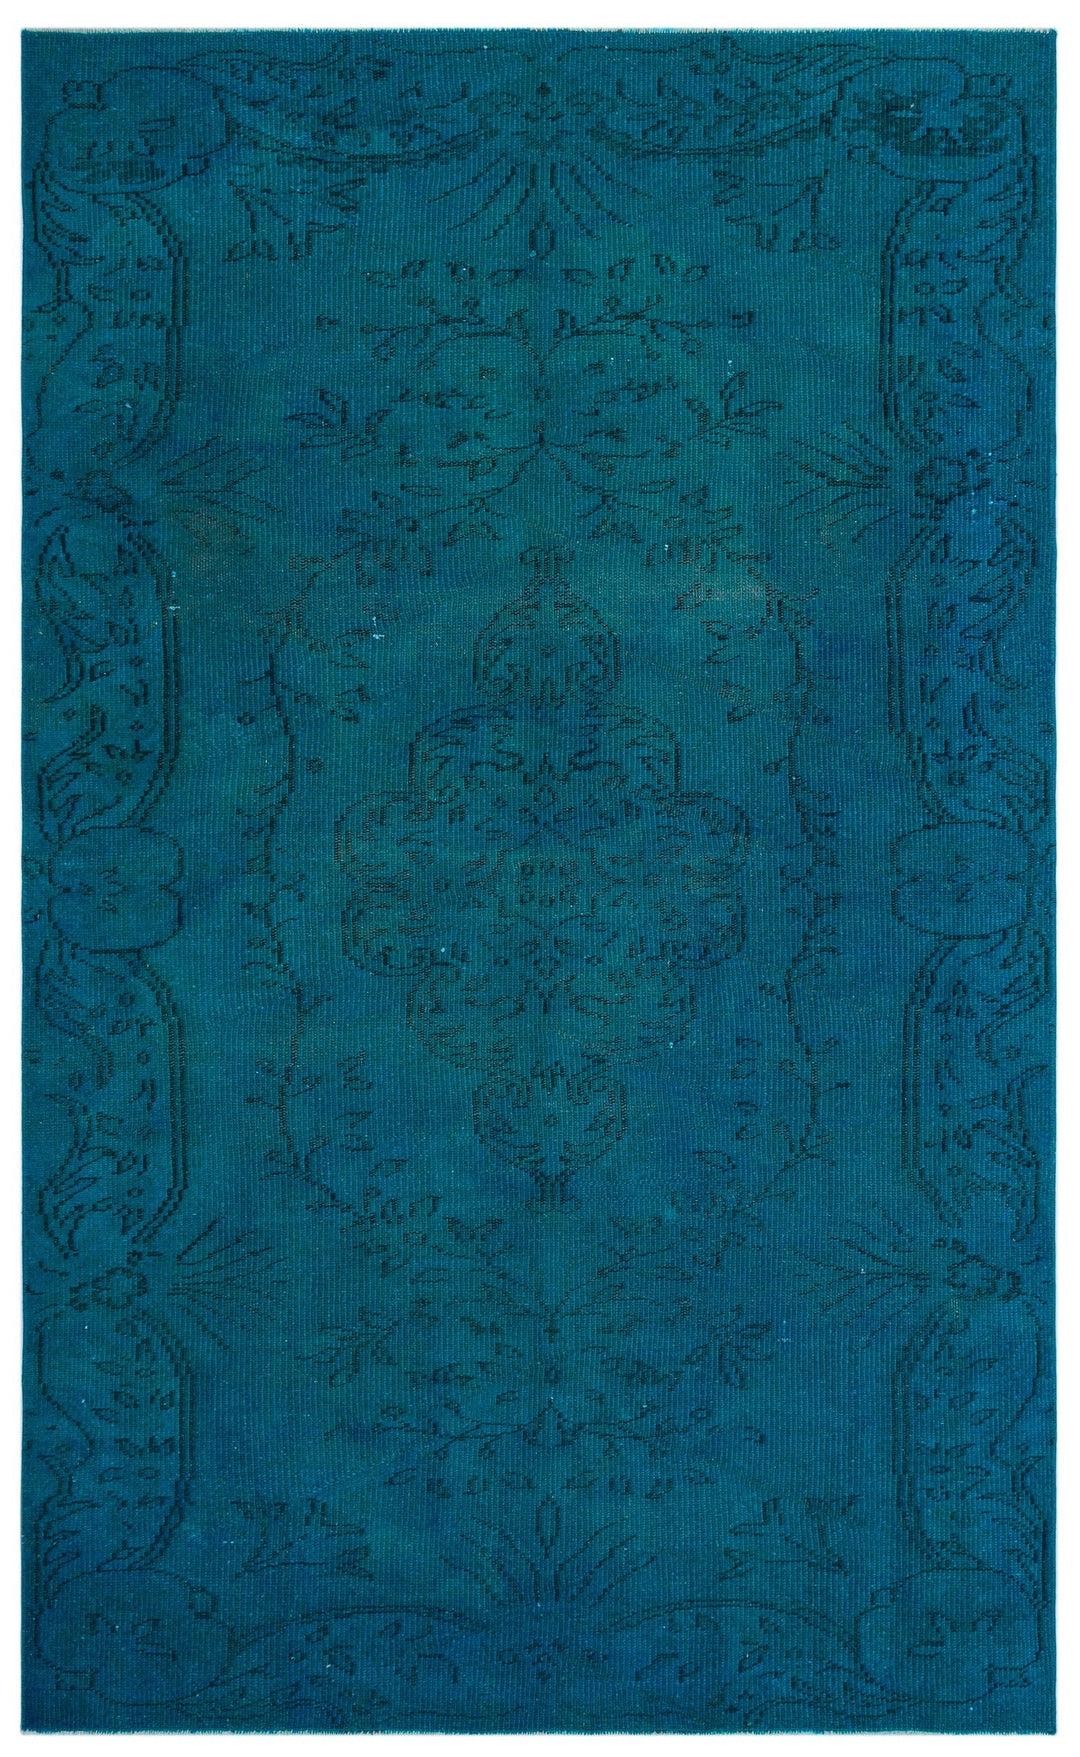 Athens Turquoise Tumbled Wool Hand Woven Carpet 161 x 256